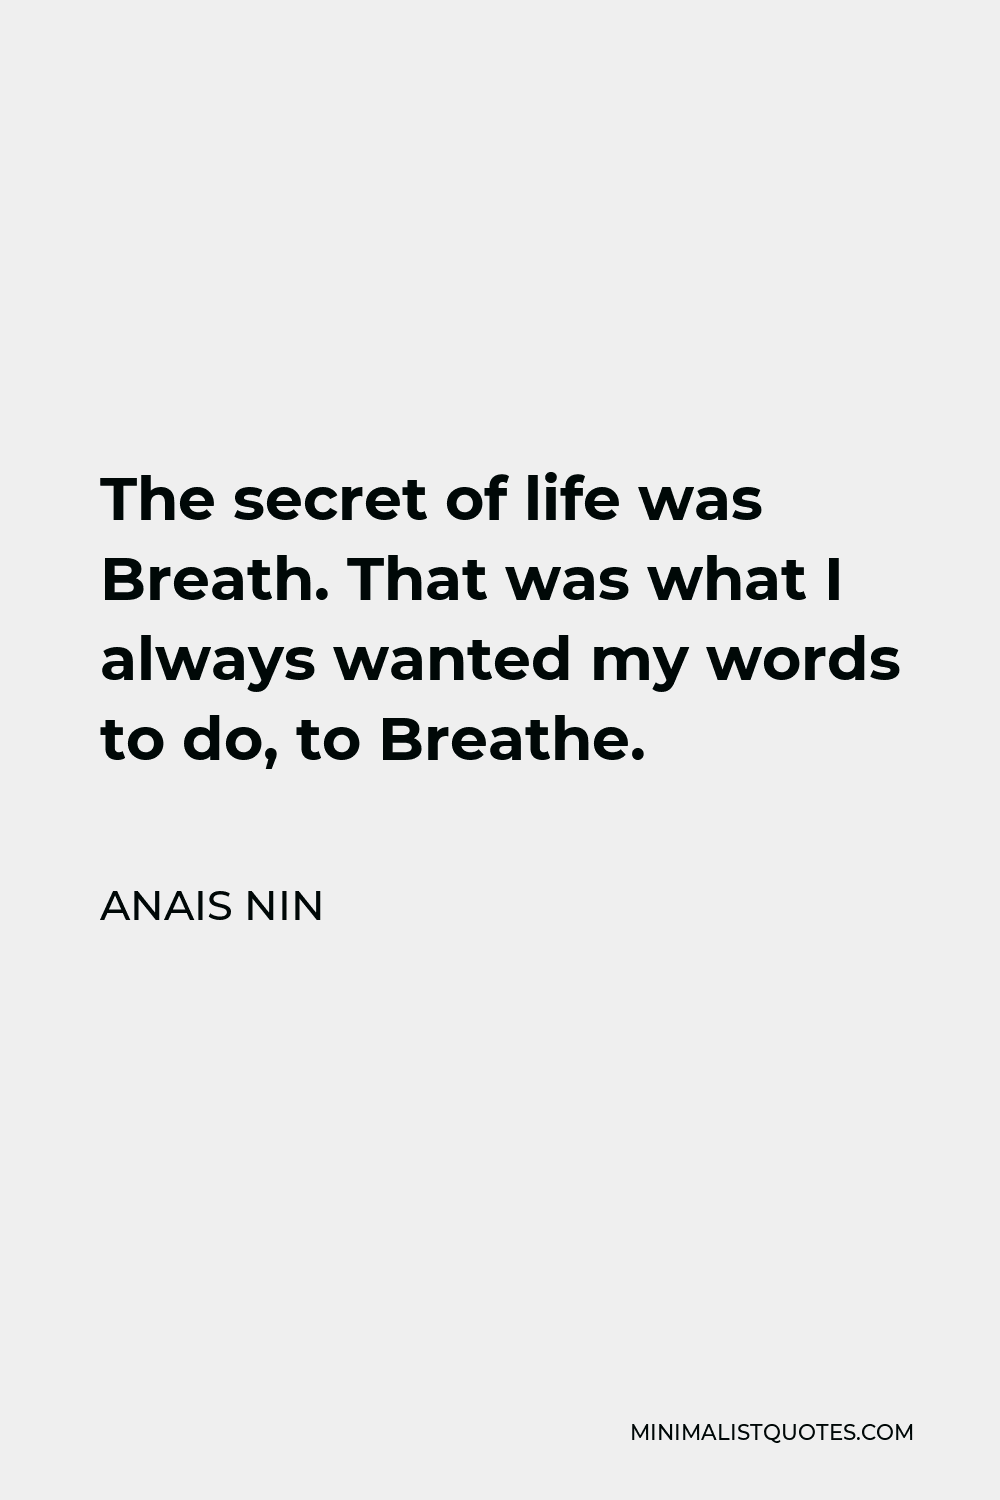 Anais Nin Quote - The secret of life was Breath. That was what I always wanted my words to do, to Breathe.